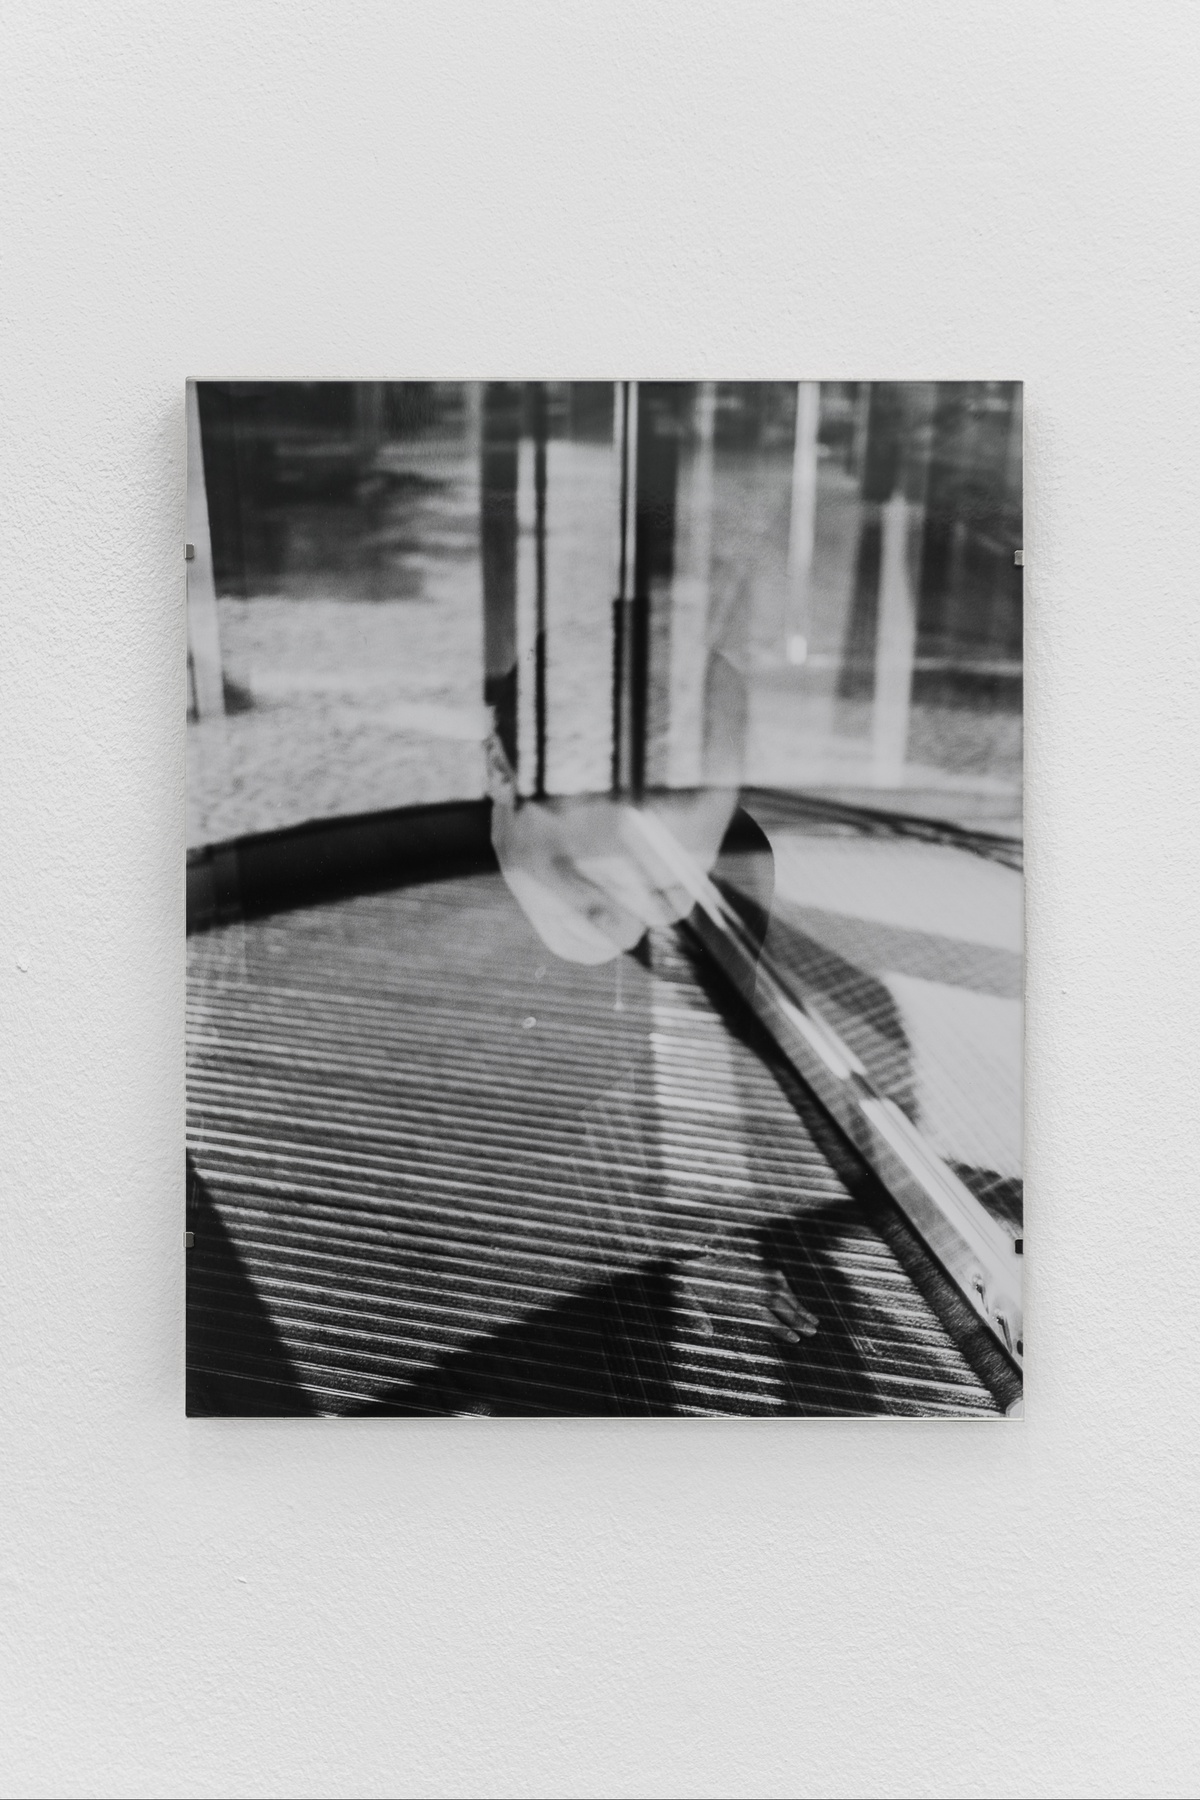 Sarah Rosengarten, But her giving up painting had everything to do with a despair over accumulated rejections, 2021analog c-print, clip frame, museum glass35,3 × 28,4 cm